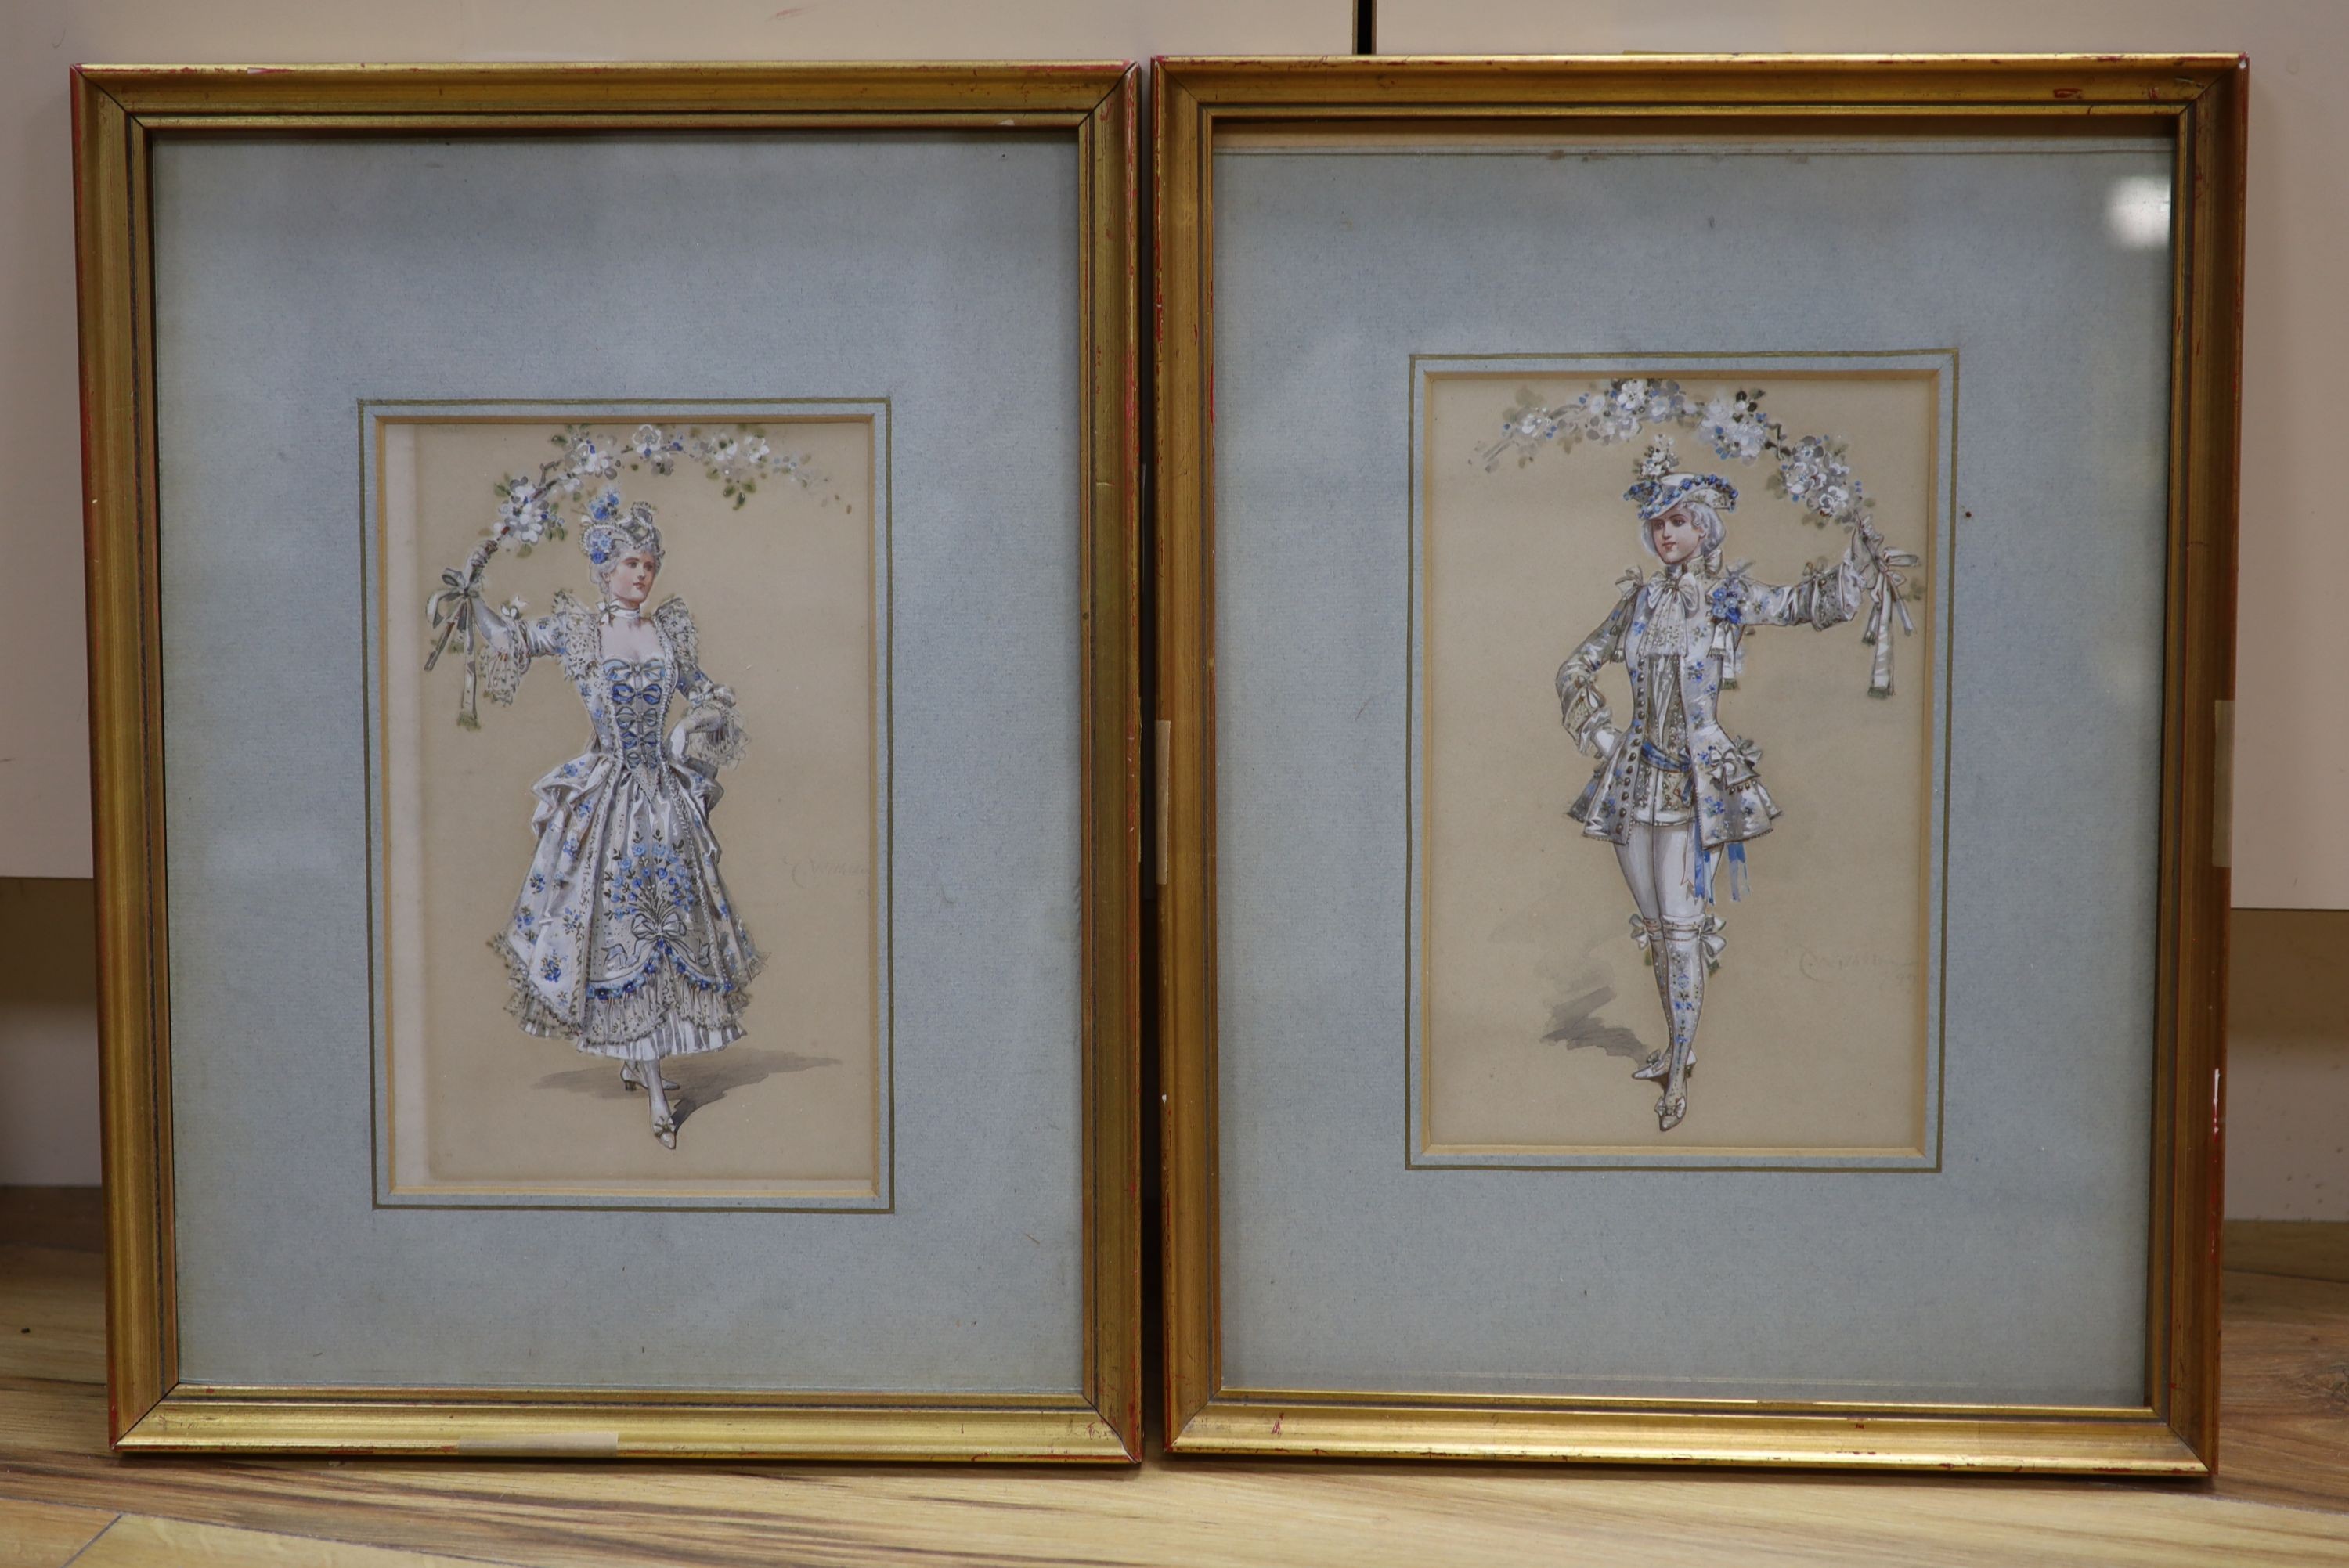 C.Wilhelm, pair of watercolours with gouache, Lady and gallant, signed and dated 99, 23 x 14cm.